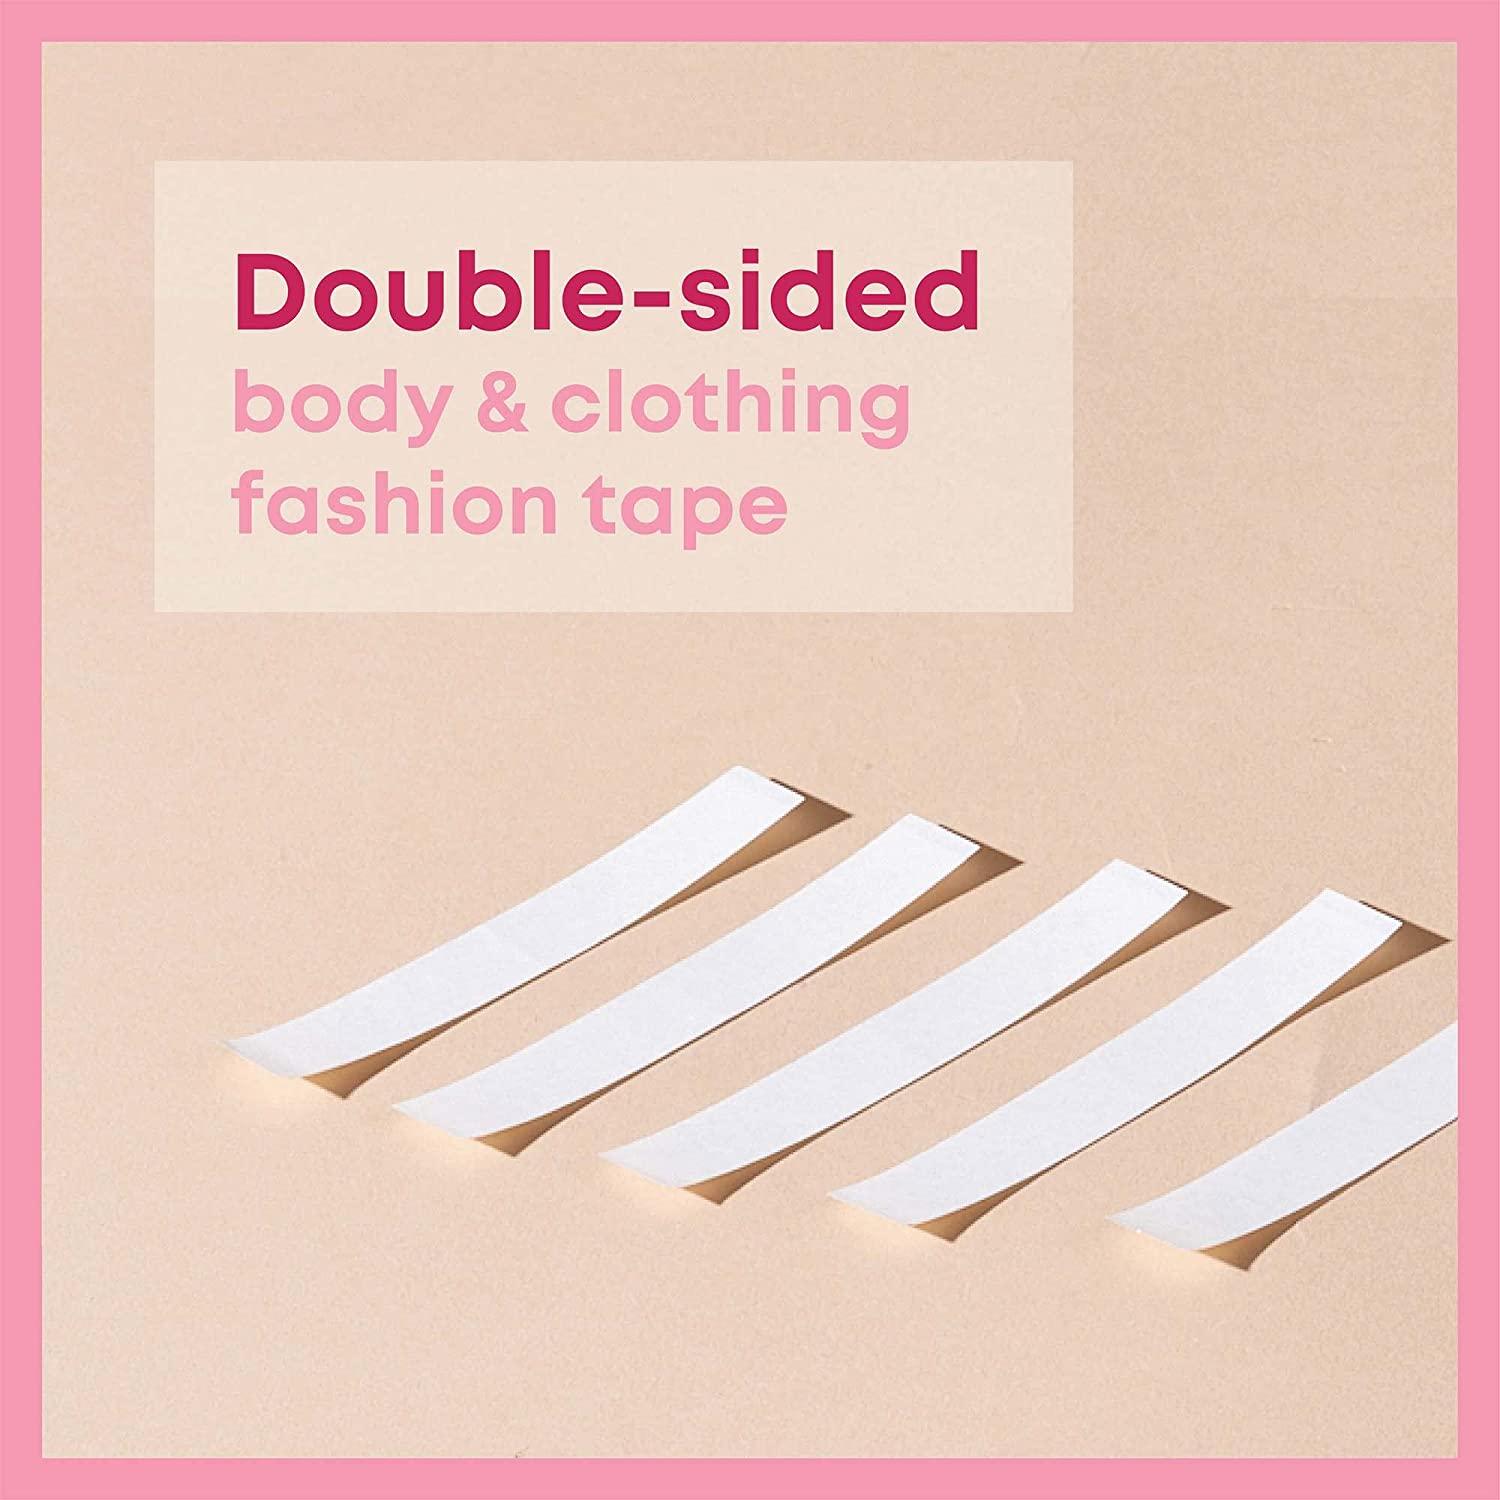 Double Sided Tape for Fashion and Body Tape for Clothes Fashion